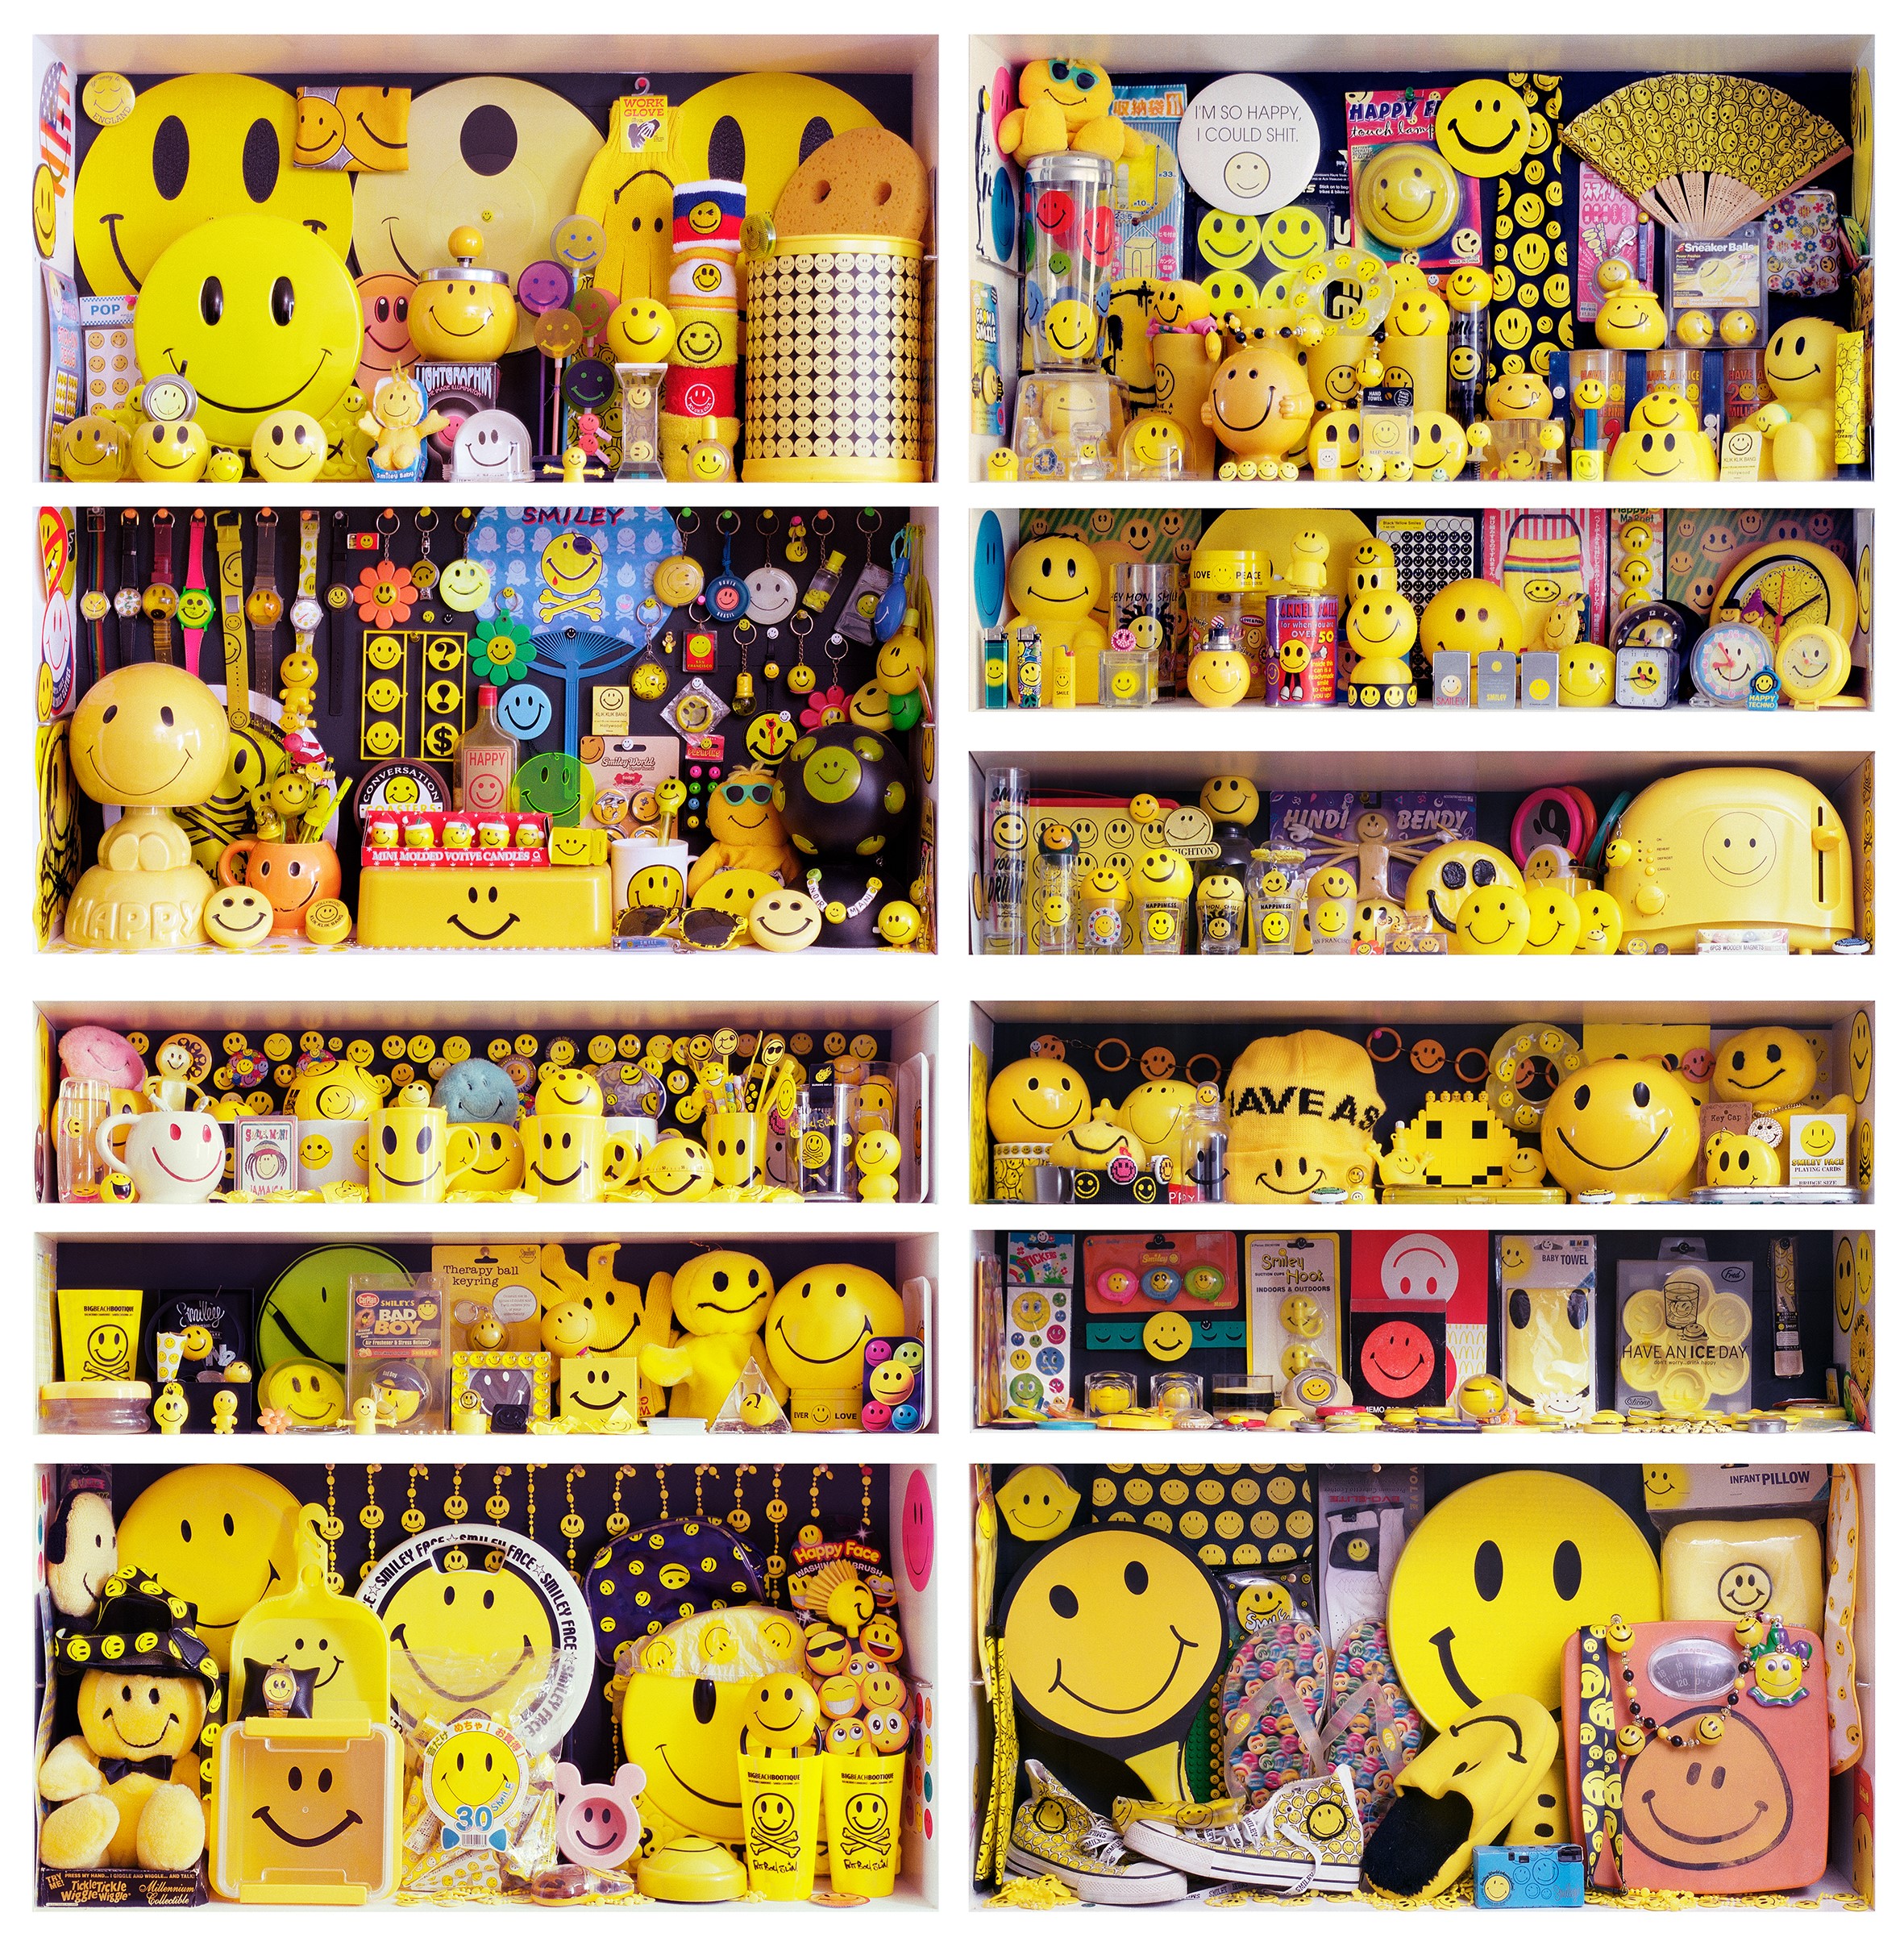 Fatboy Slim's Smiley Collection captured by British photographic artist Mark Vessey (Mark Vessey/PA)